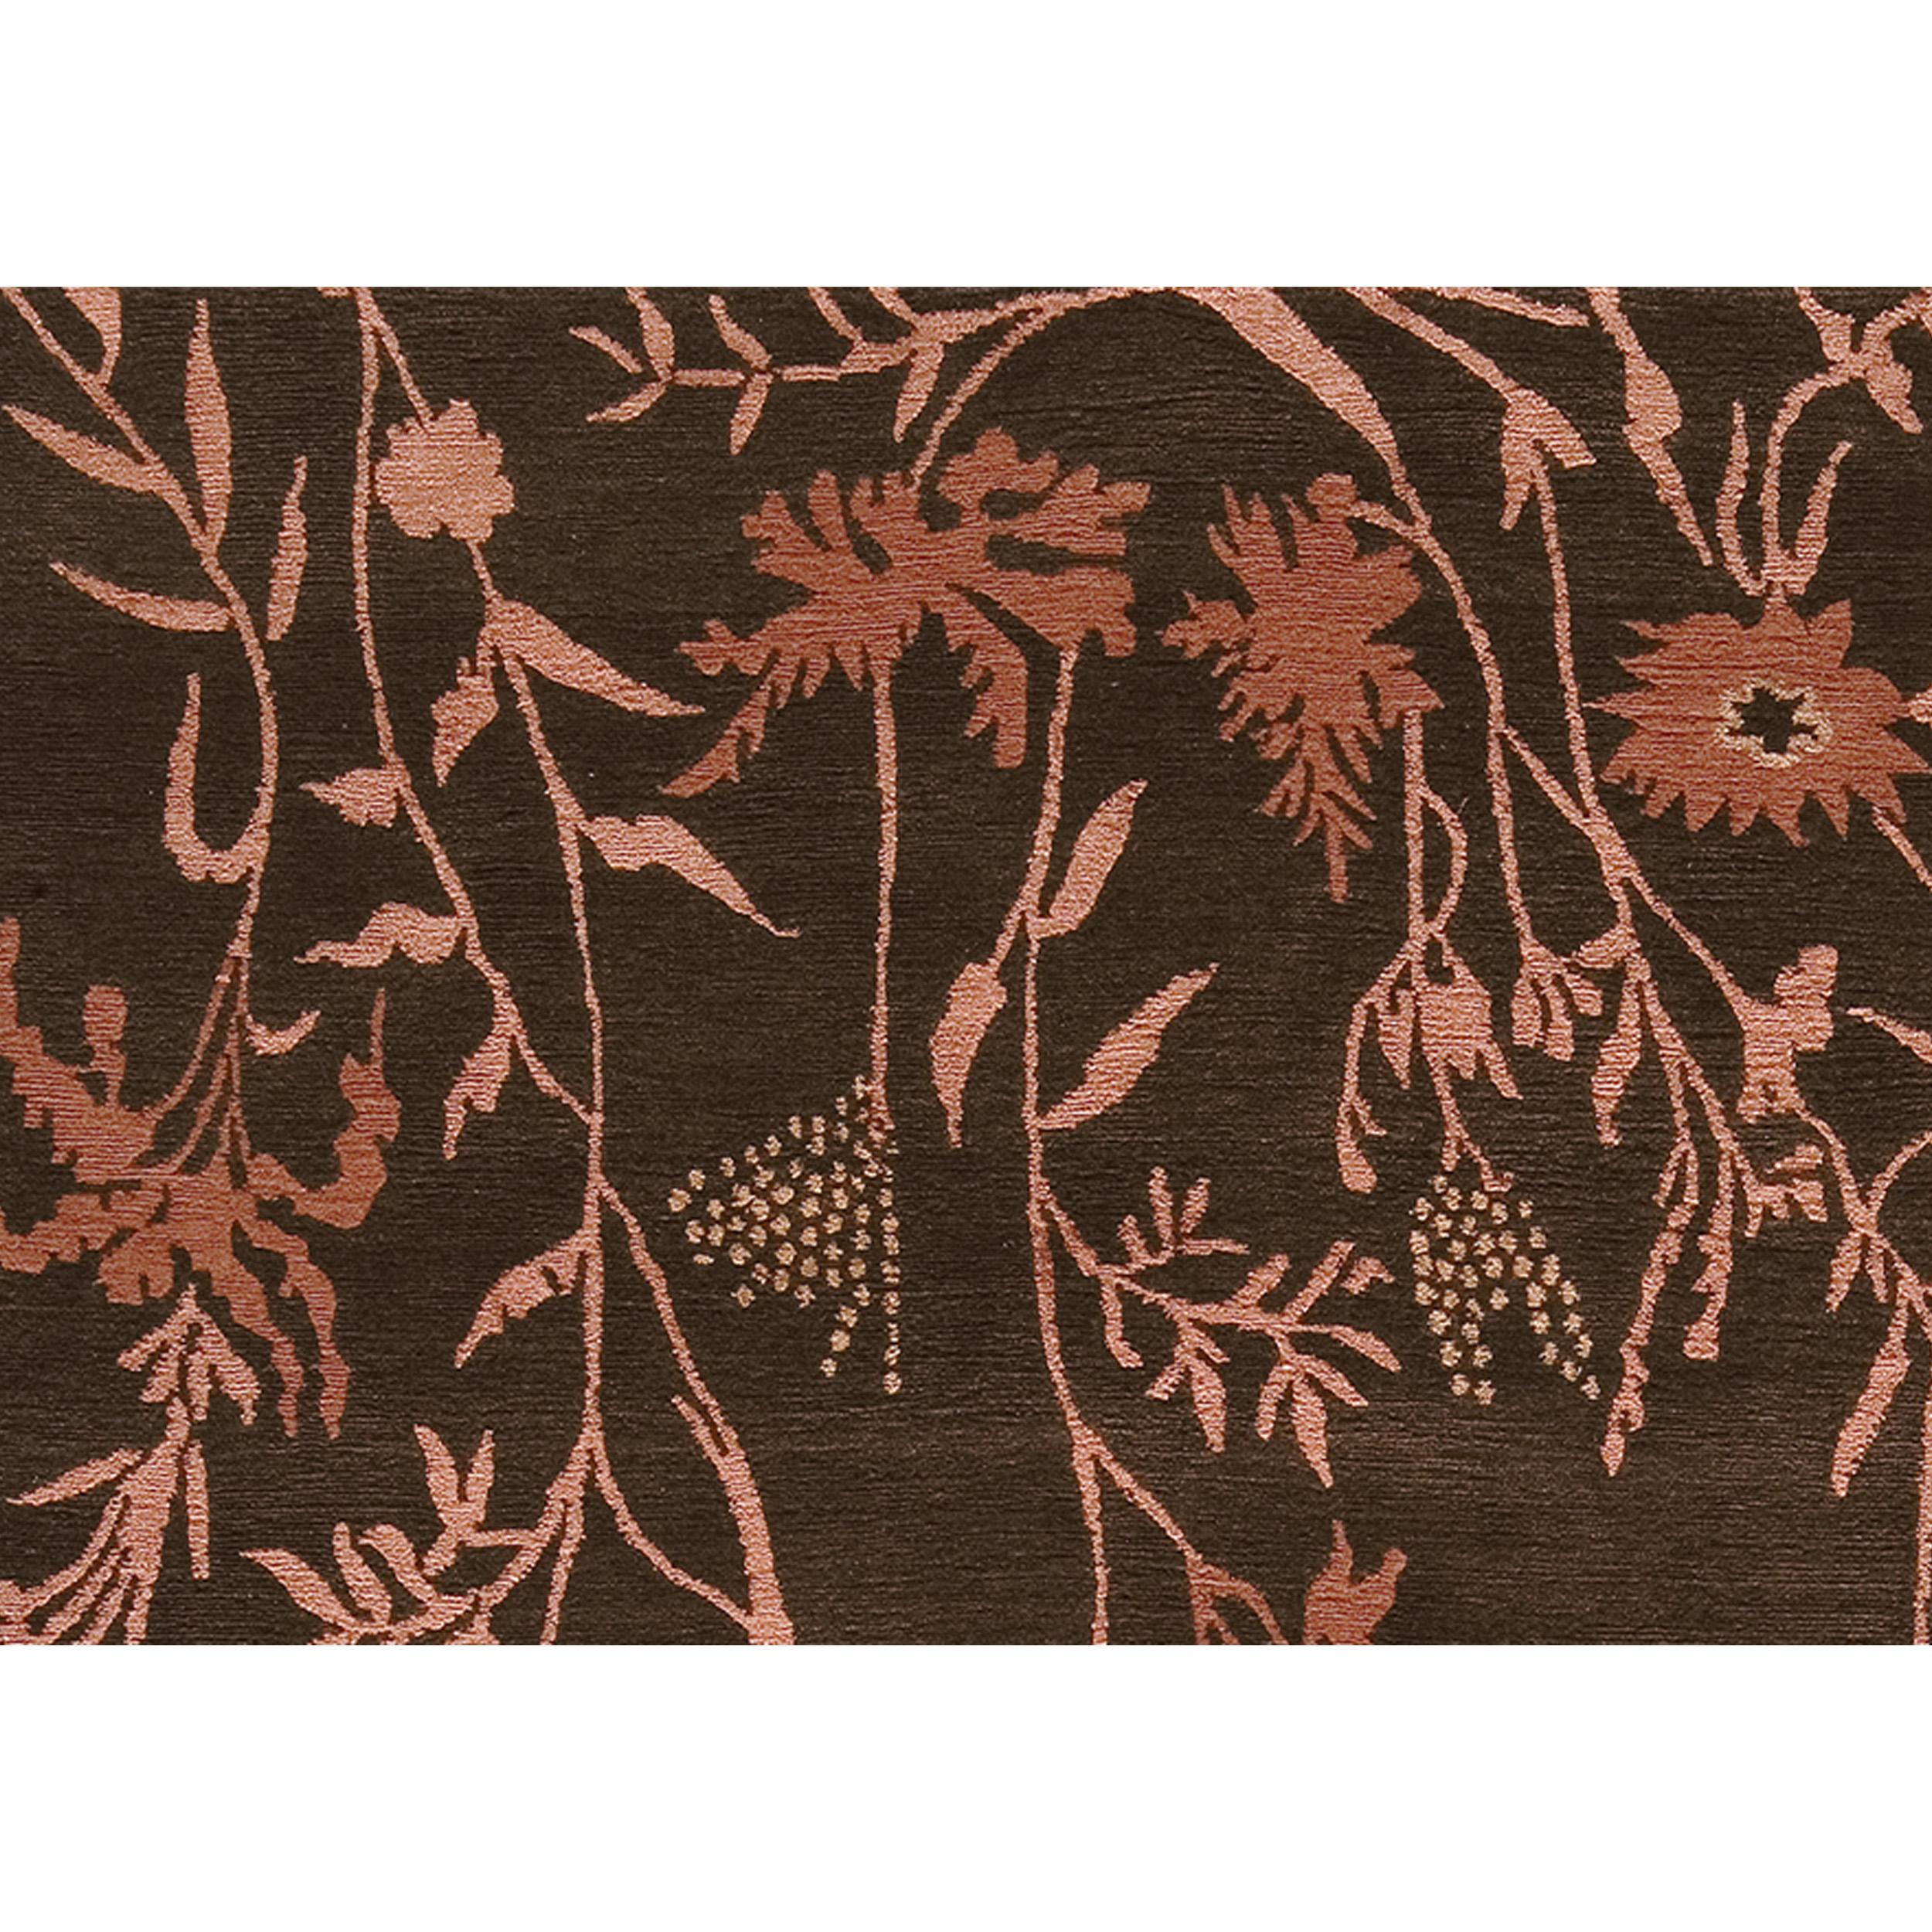 Luxury Modern Hand-Knotted Empress Spring Brown/Rose 10X14 Rug In New Condition For Sale In Secaucus, NJ